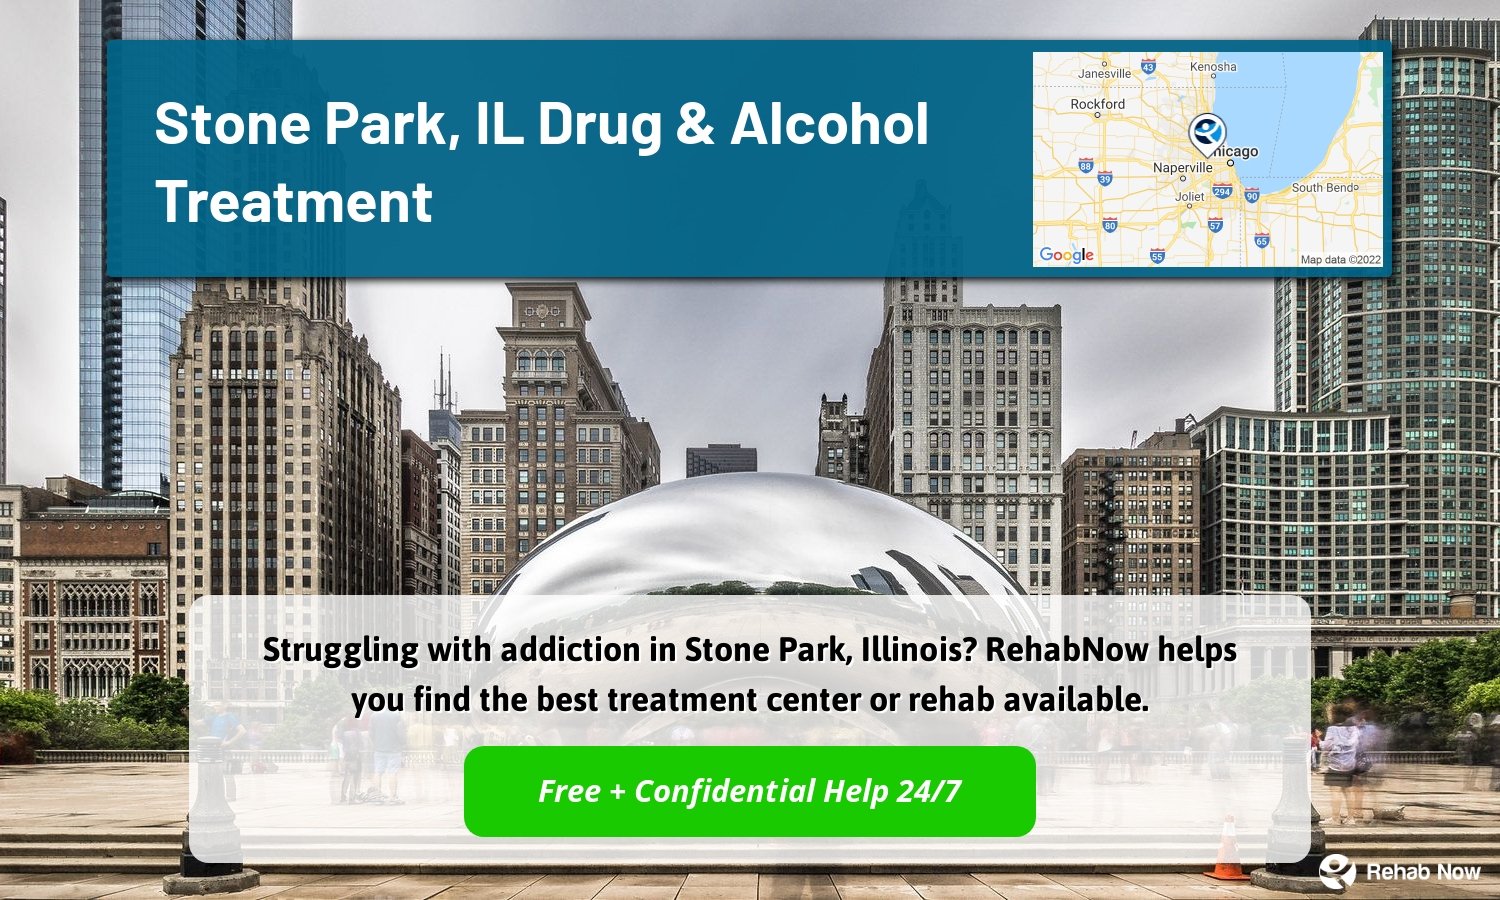 Struggling with addiction in Stone Park, Illinois? RehabNow helps you find the best treatment center or rehab available.